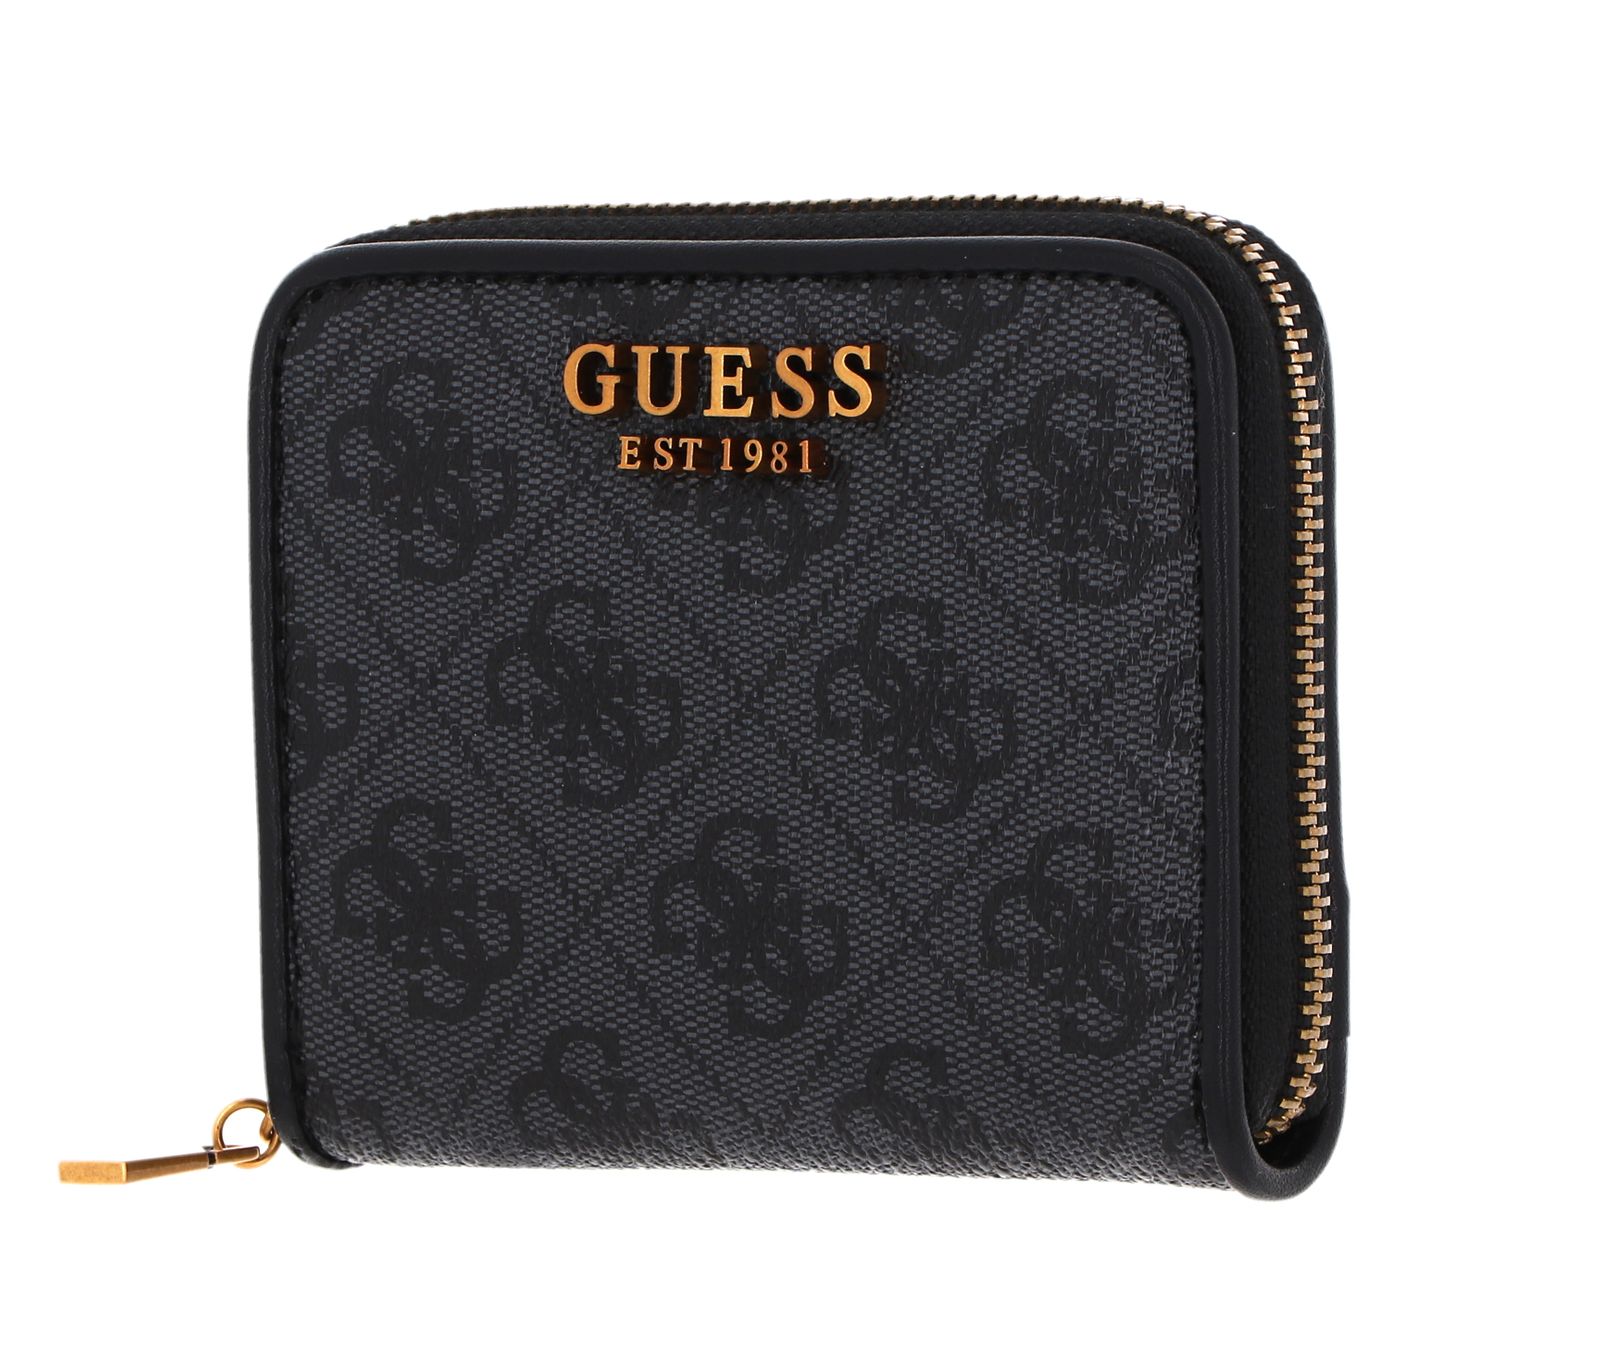 Guess IZZY SLG SMALL ZIP AROUND